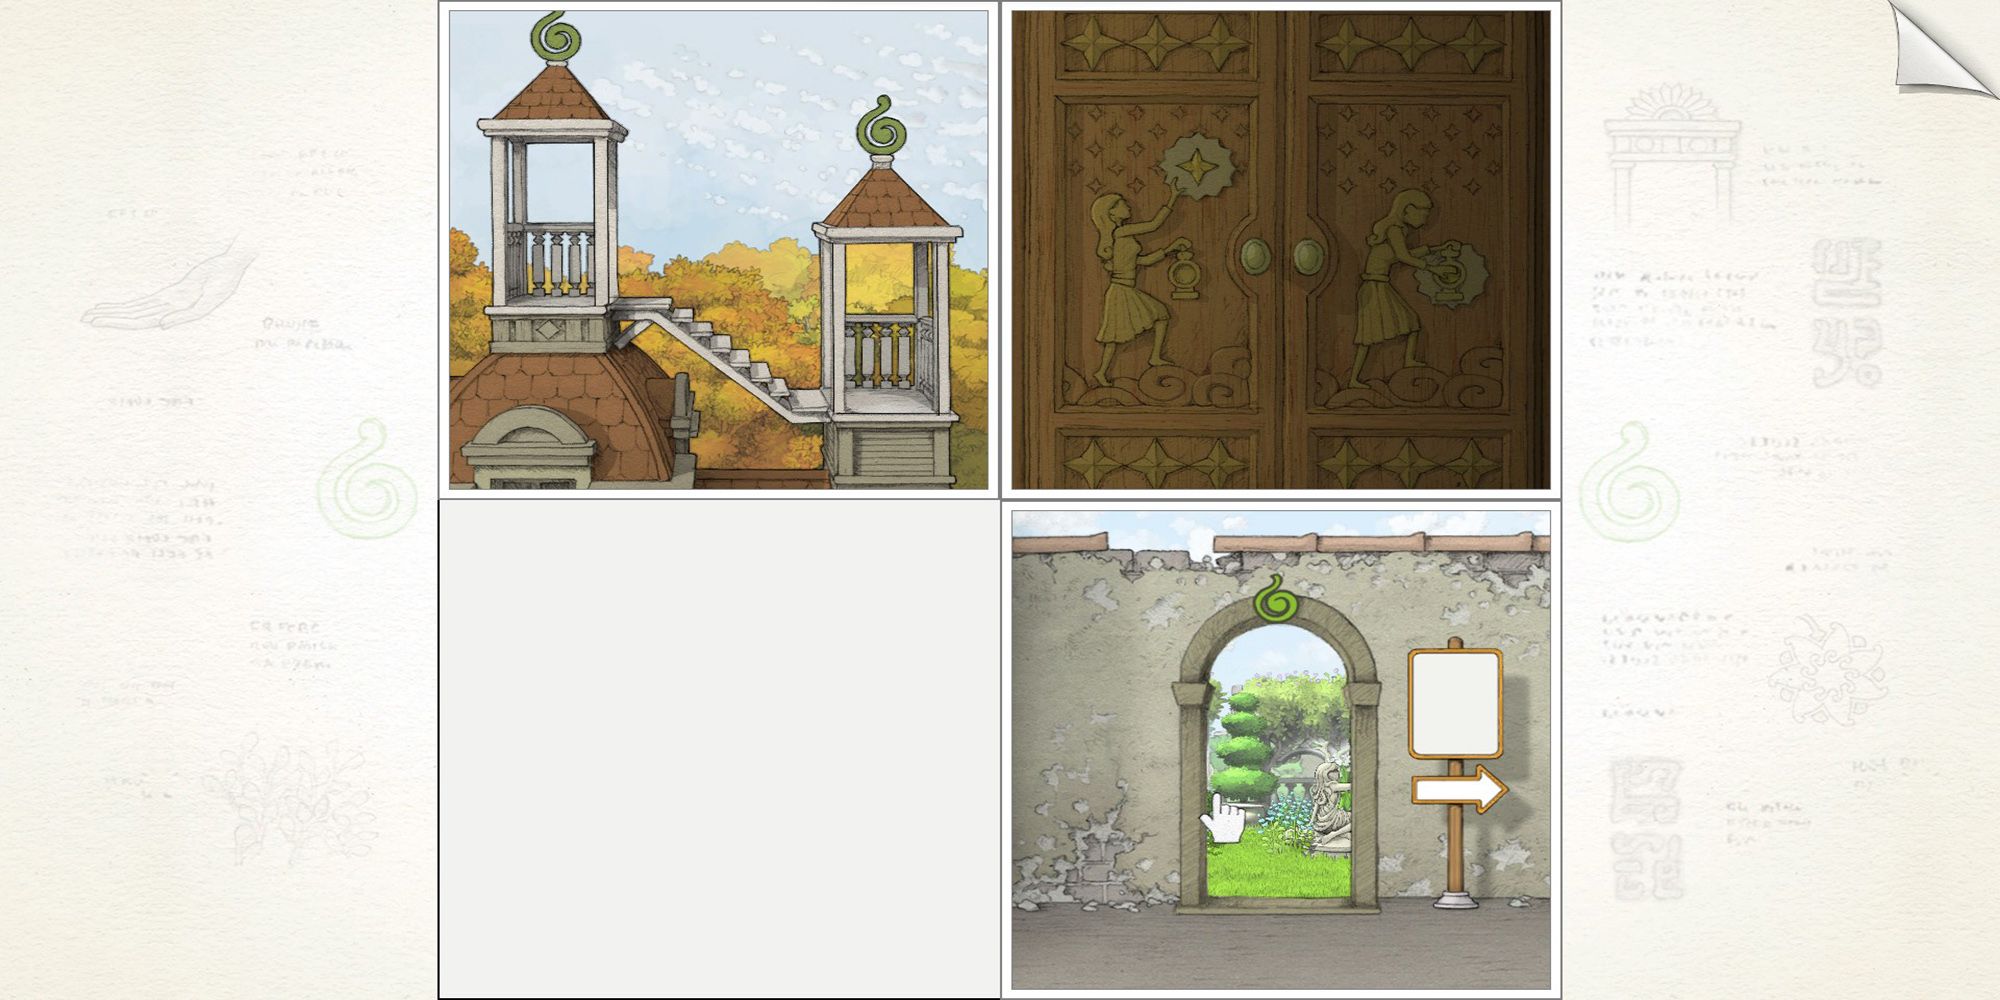 The Green Entrance is revealed in Chapter Two of Gorogoa.